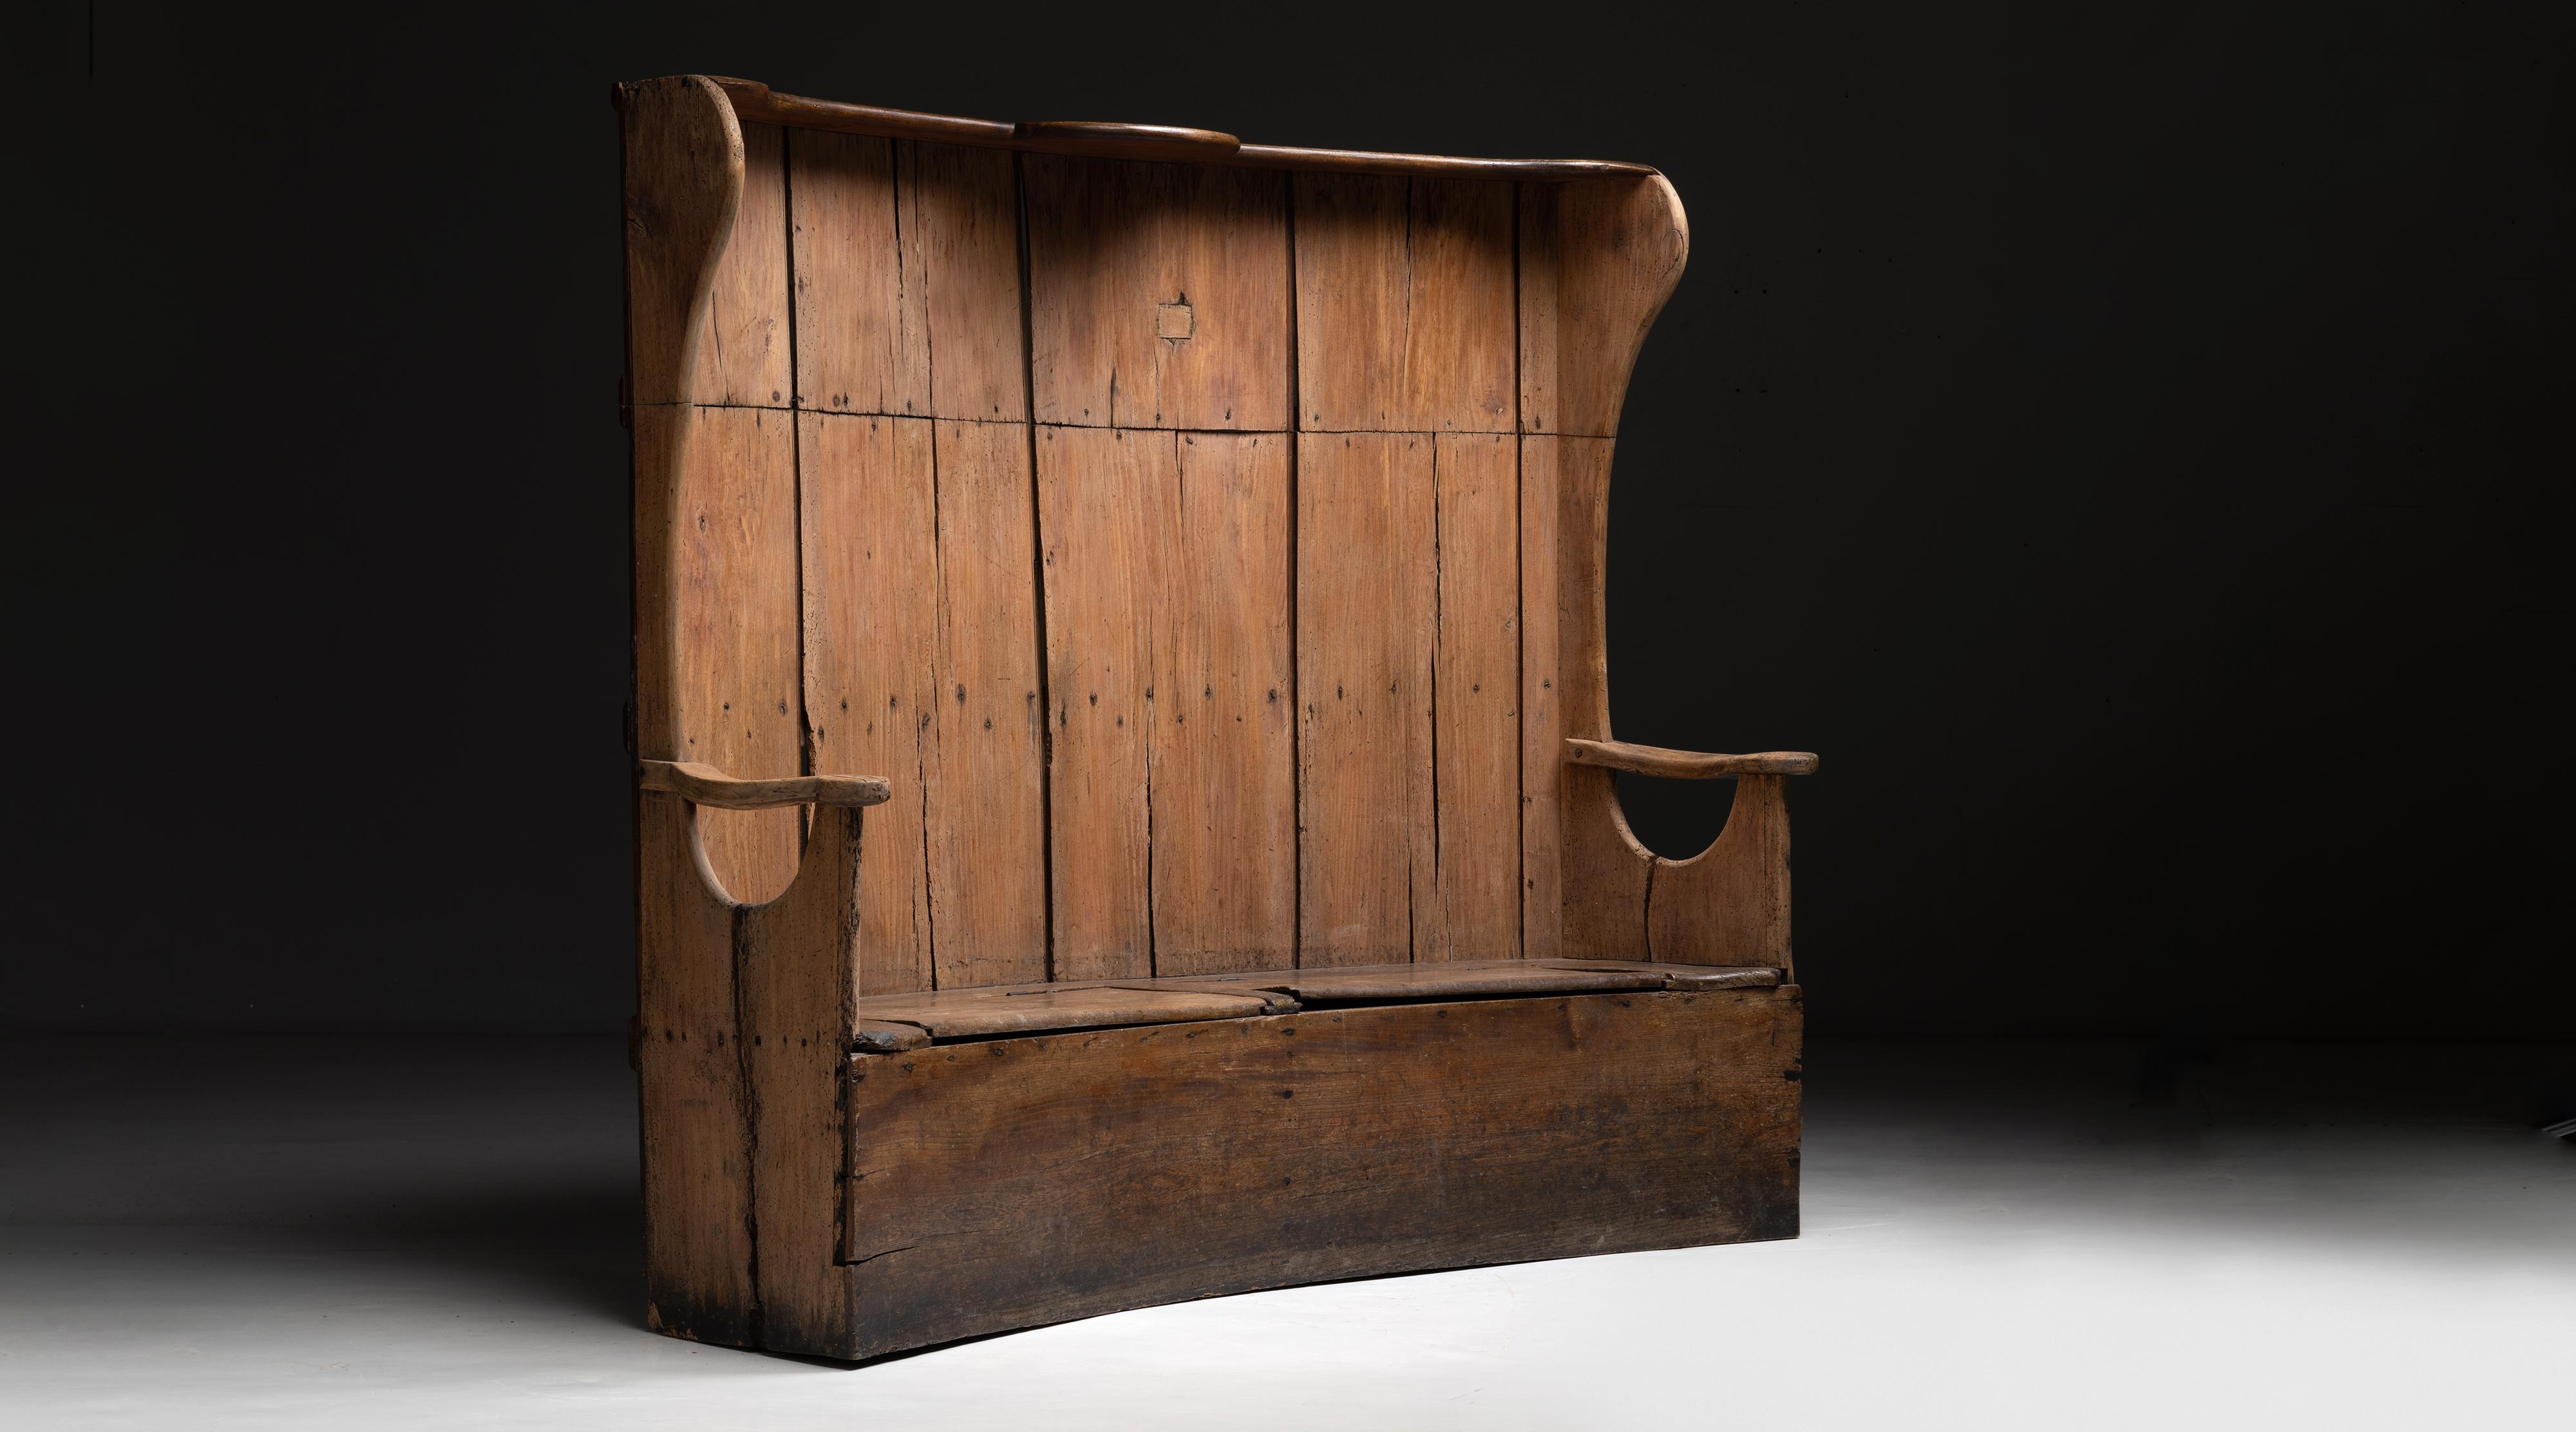 Painted elm box seat settle

England, circa 1790

Planked elm backrest with oak box seat and shaped armrests.

Measures : 71” L x 22” d x 61.5” h x 15.5”seat.